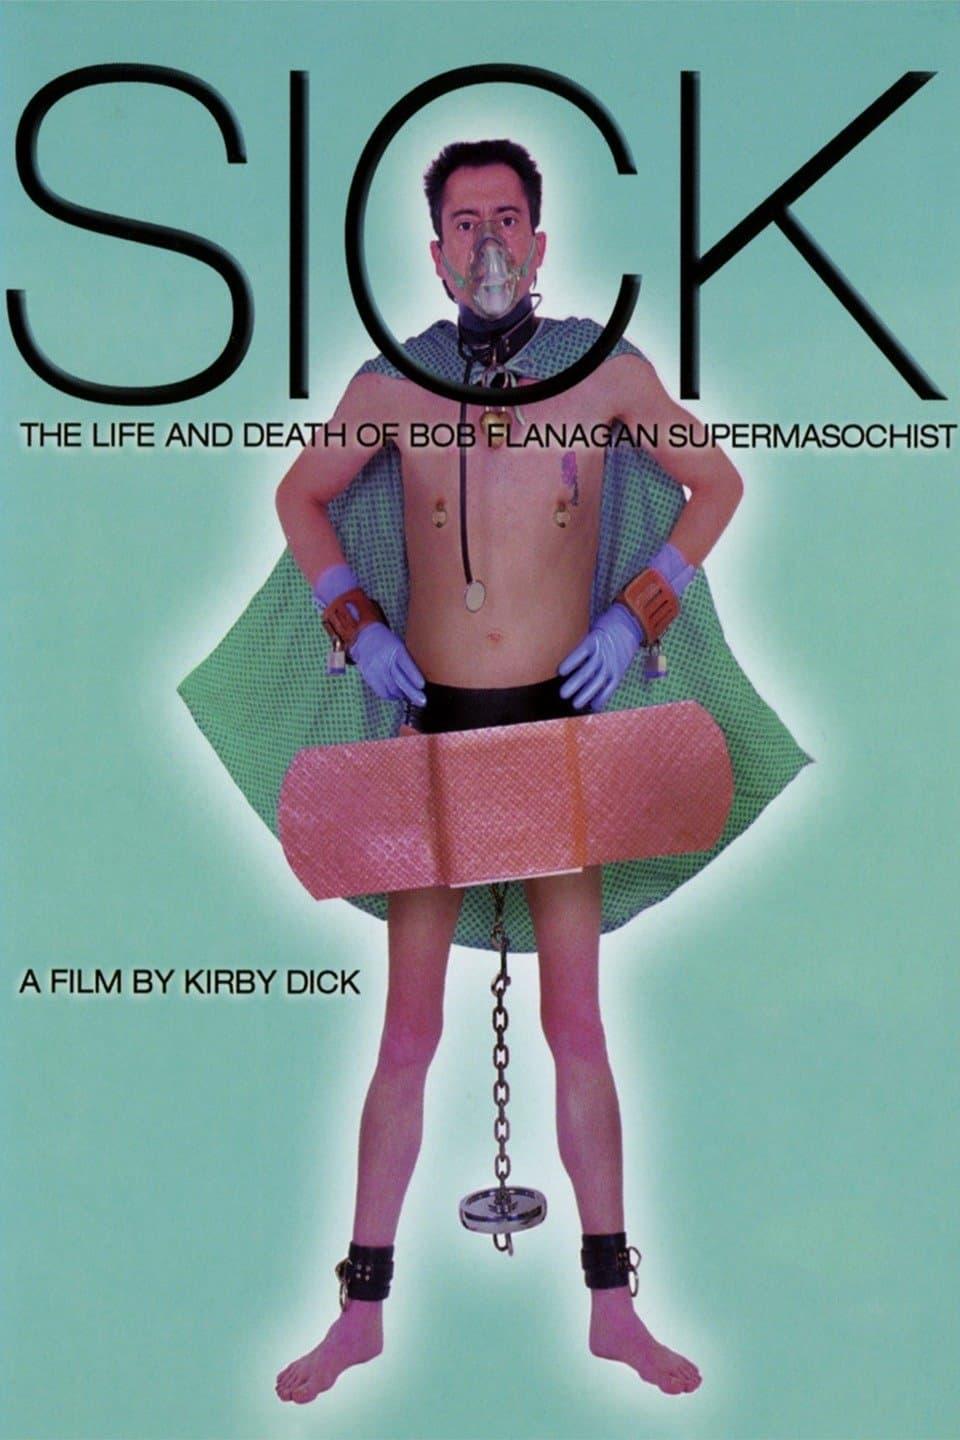 SICK: The Life and Death of Bob Flanagan, Supermasochist poster